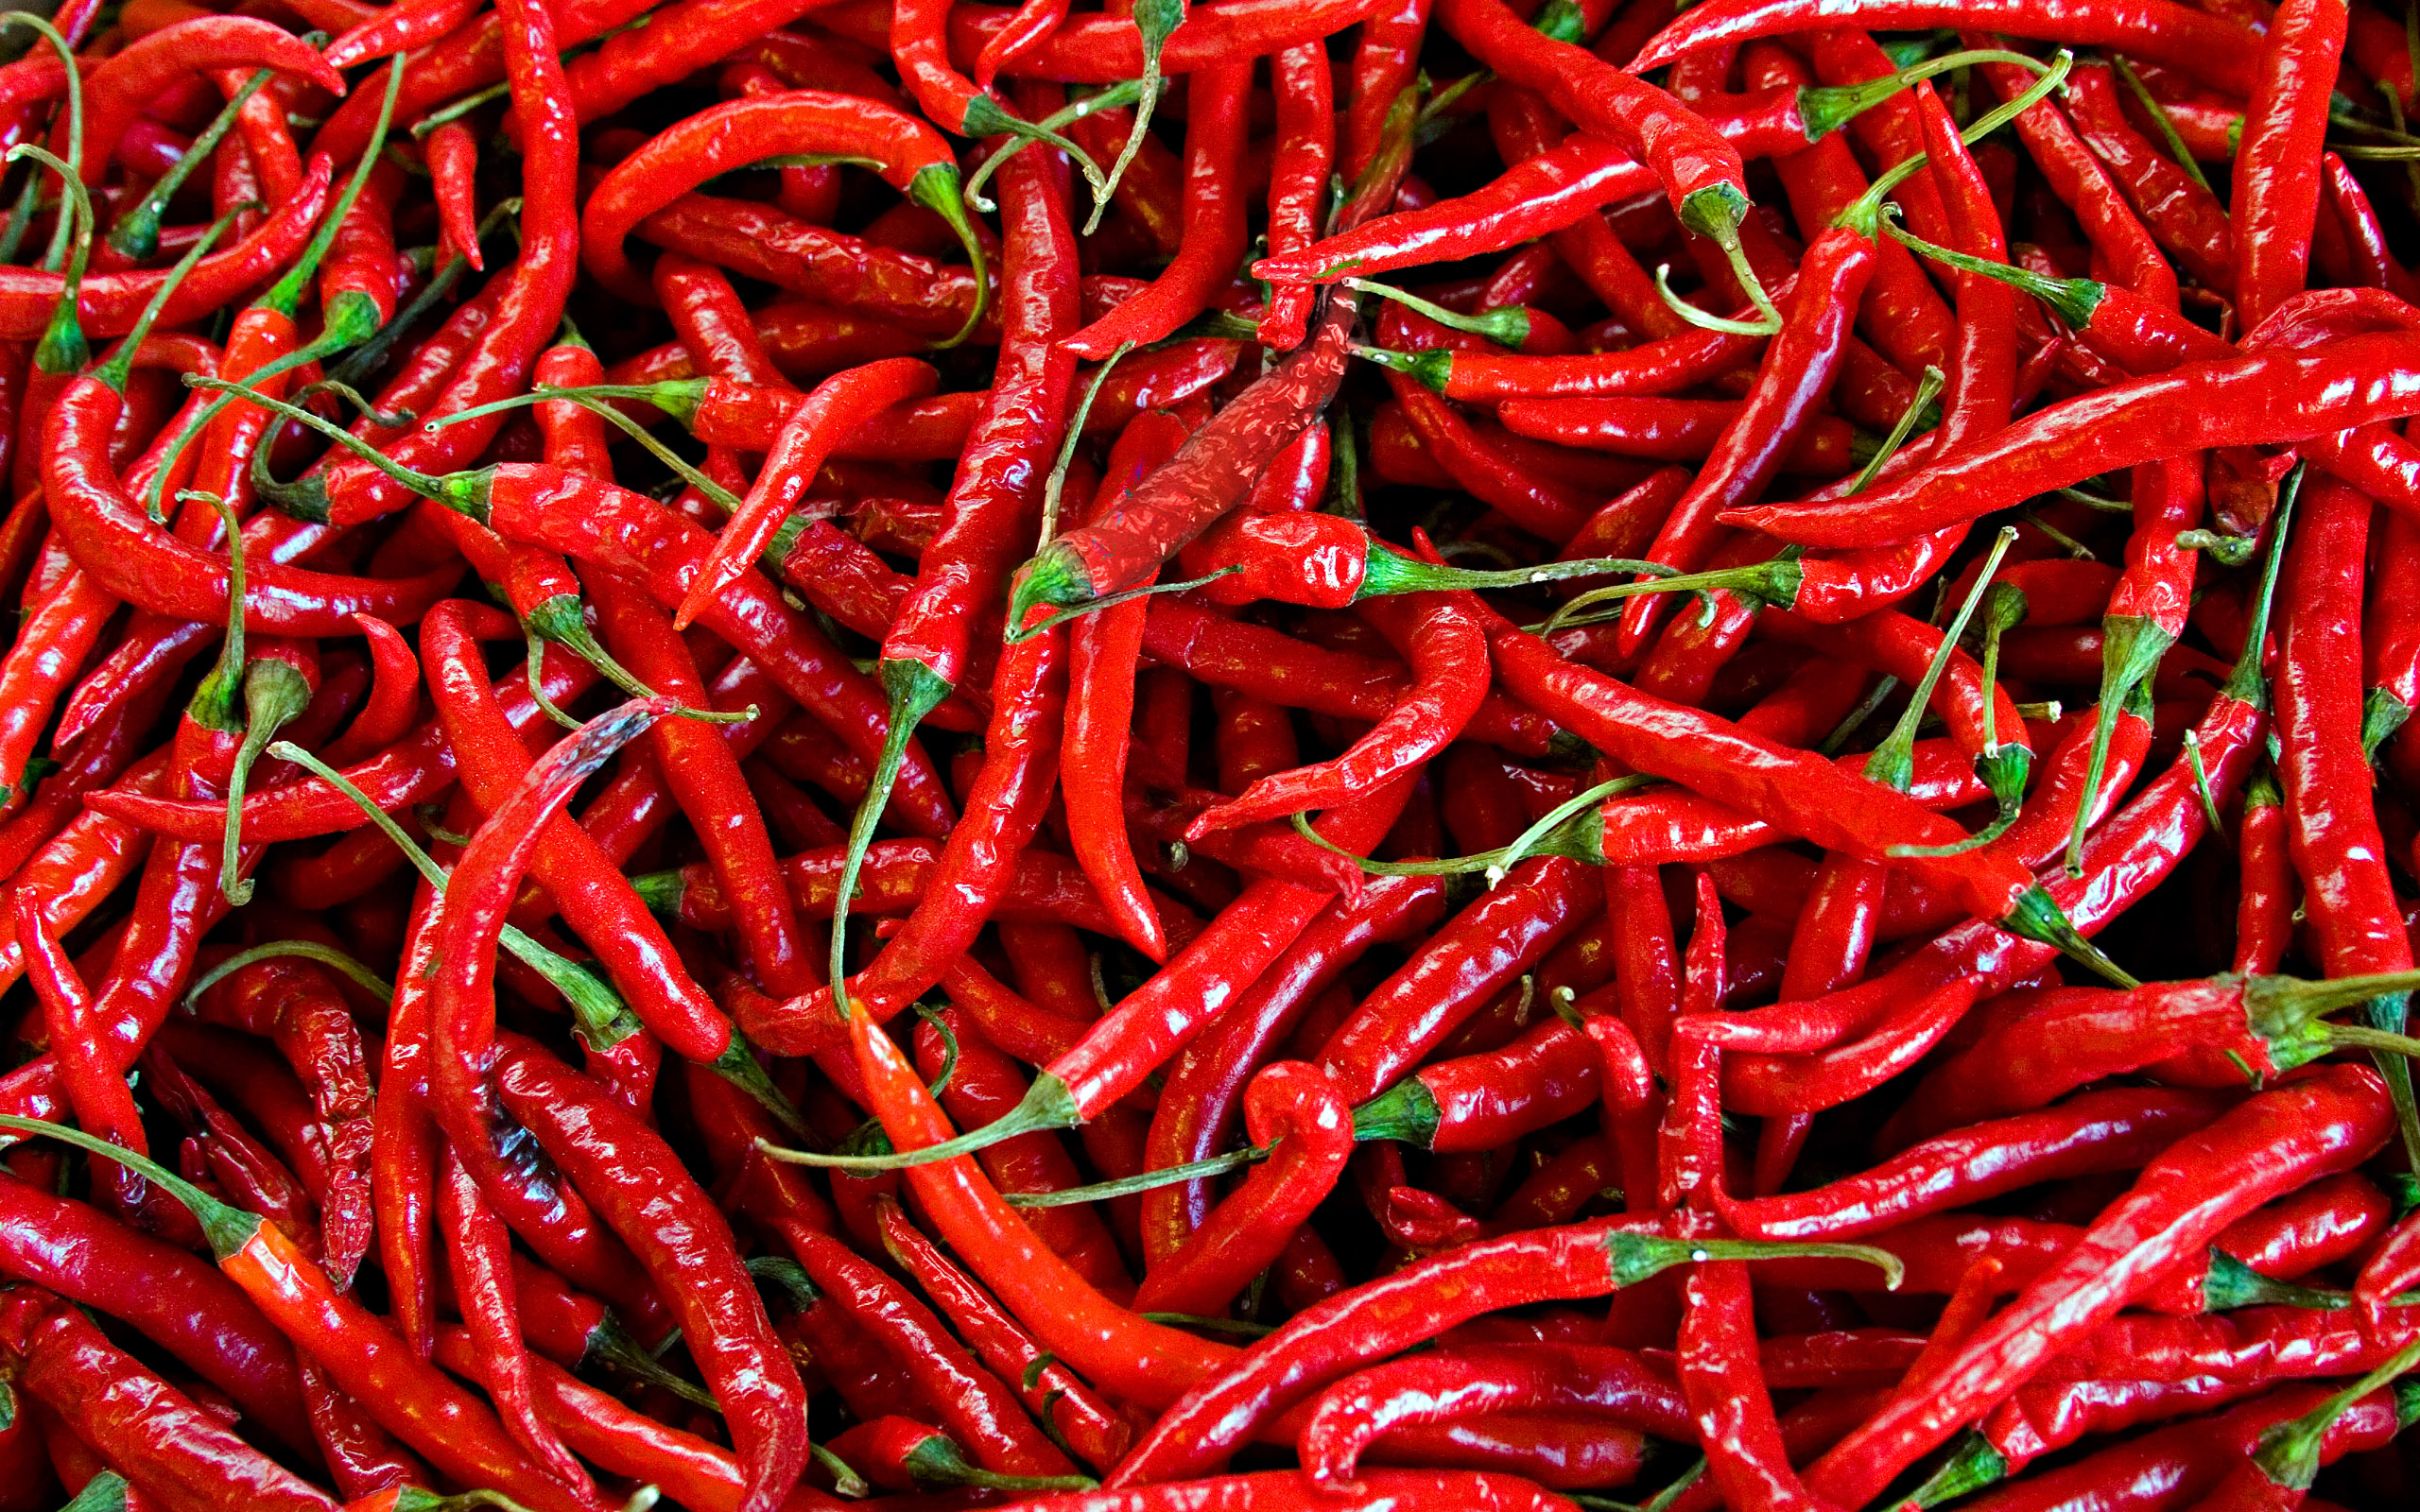 Clip Arts Related To : smoke spicy red hot chili pepper. view all Chili Pep...